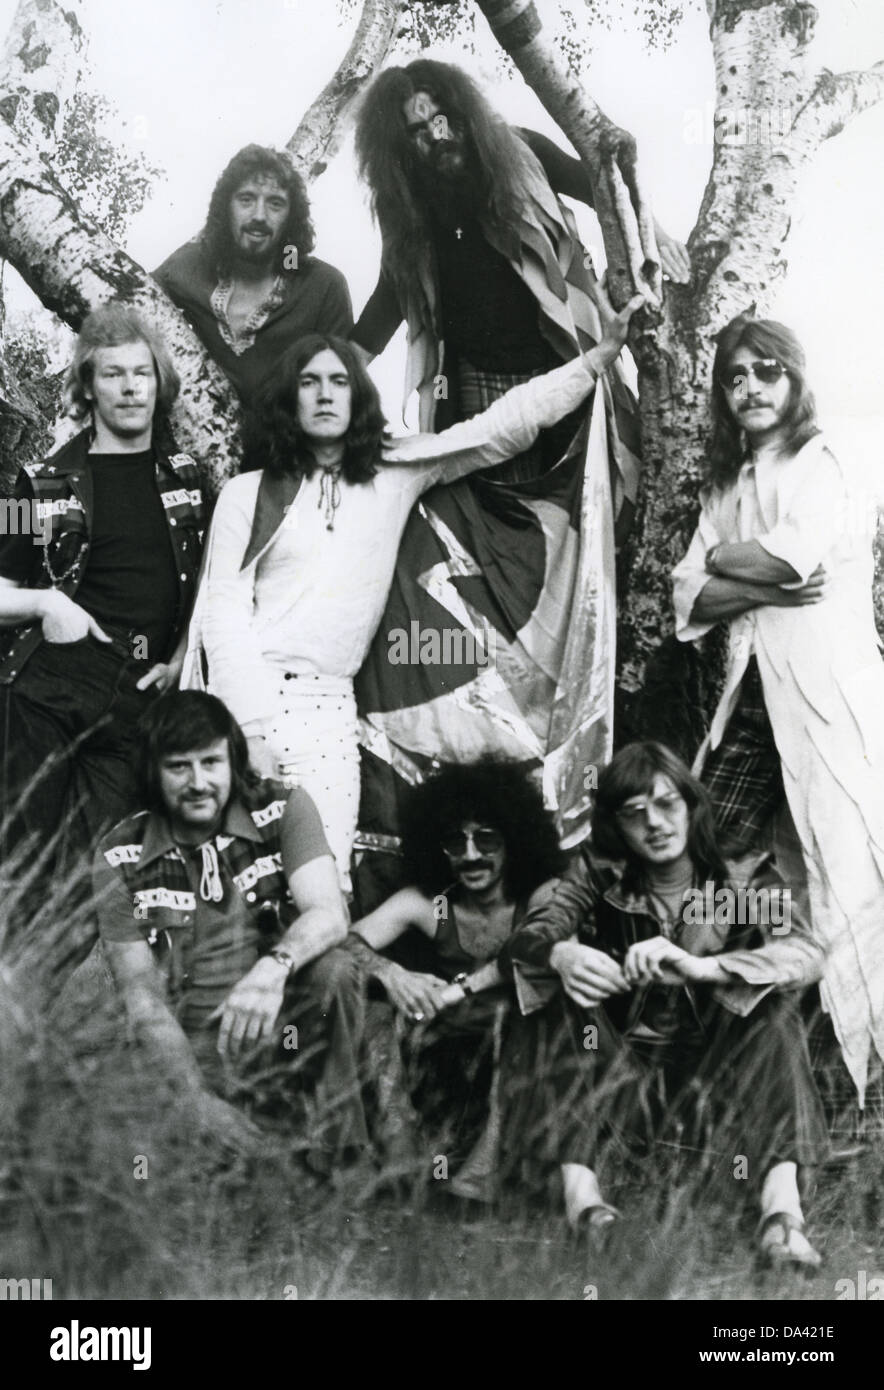 WIZZARD Promotional photo of UK pop group about 1974 with Roy Wood at top Stock Photo